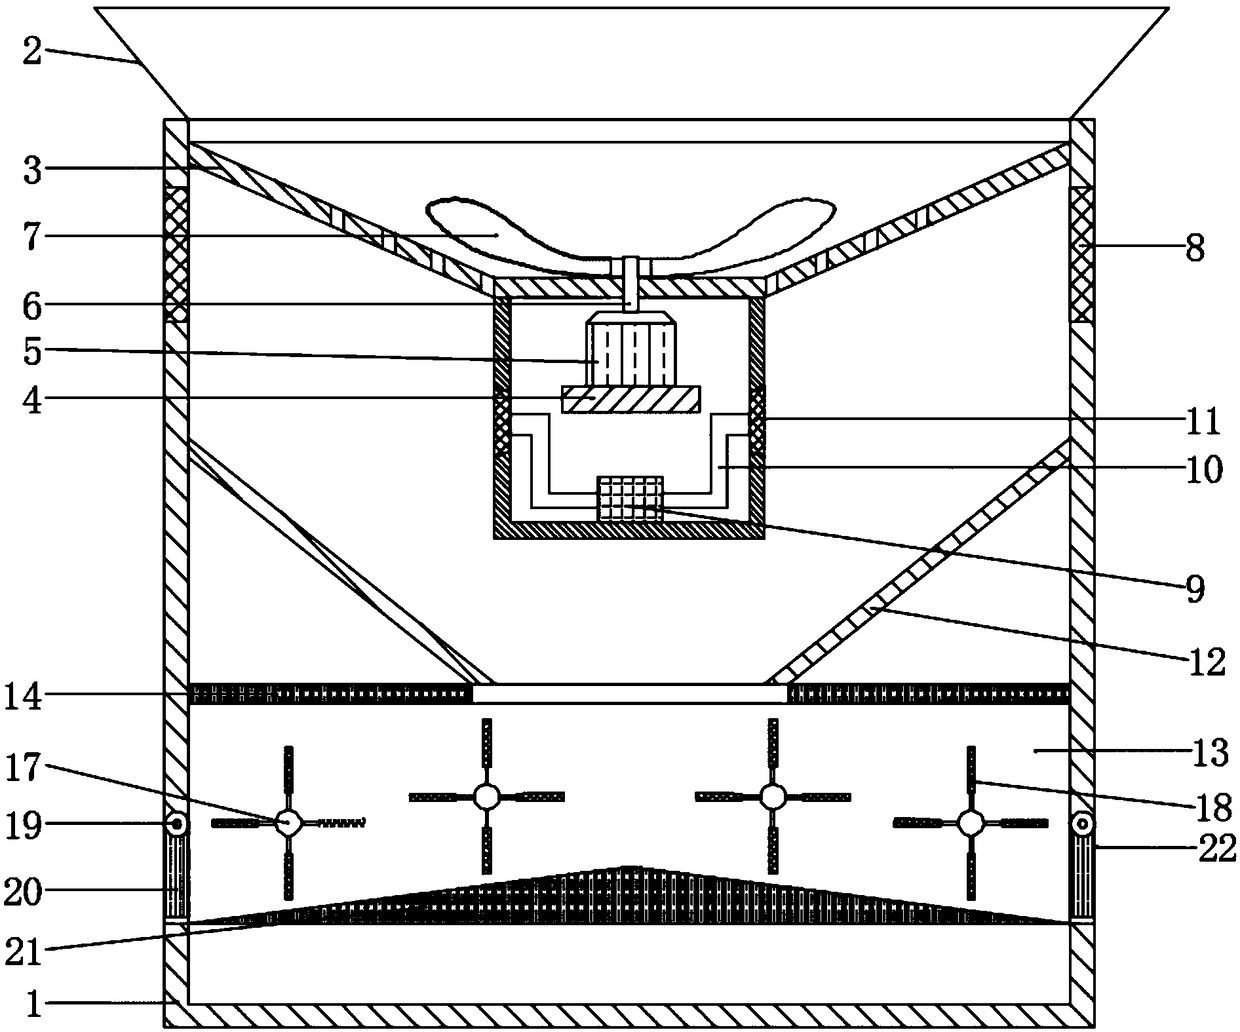 Multi-level cereal drying device